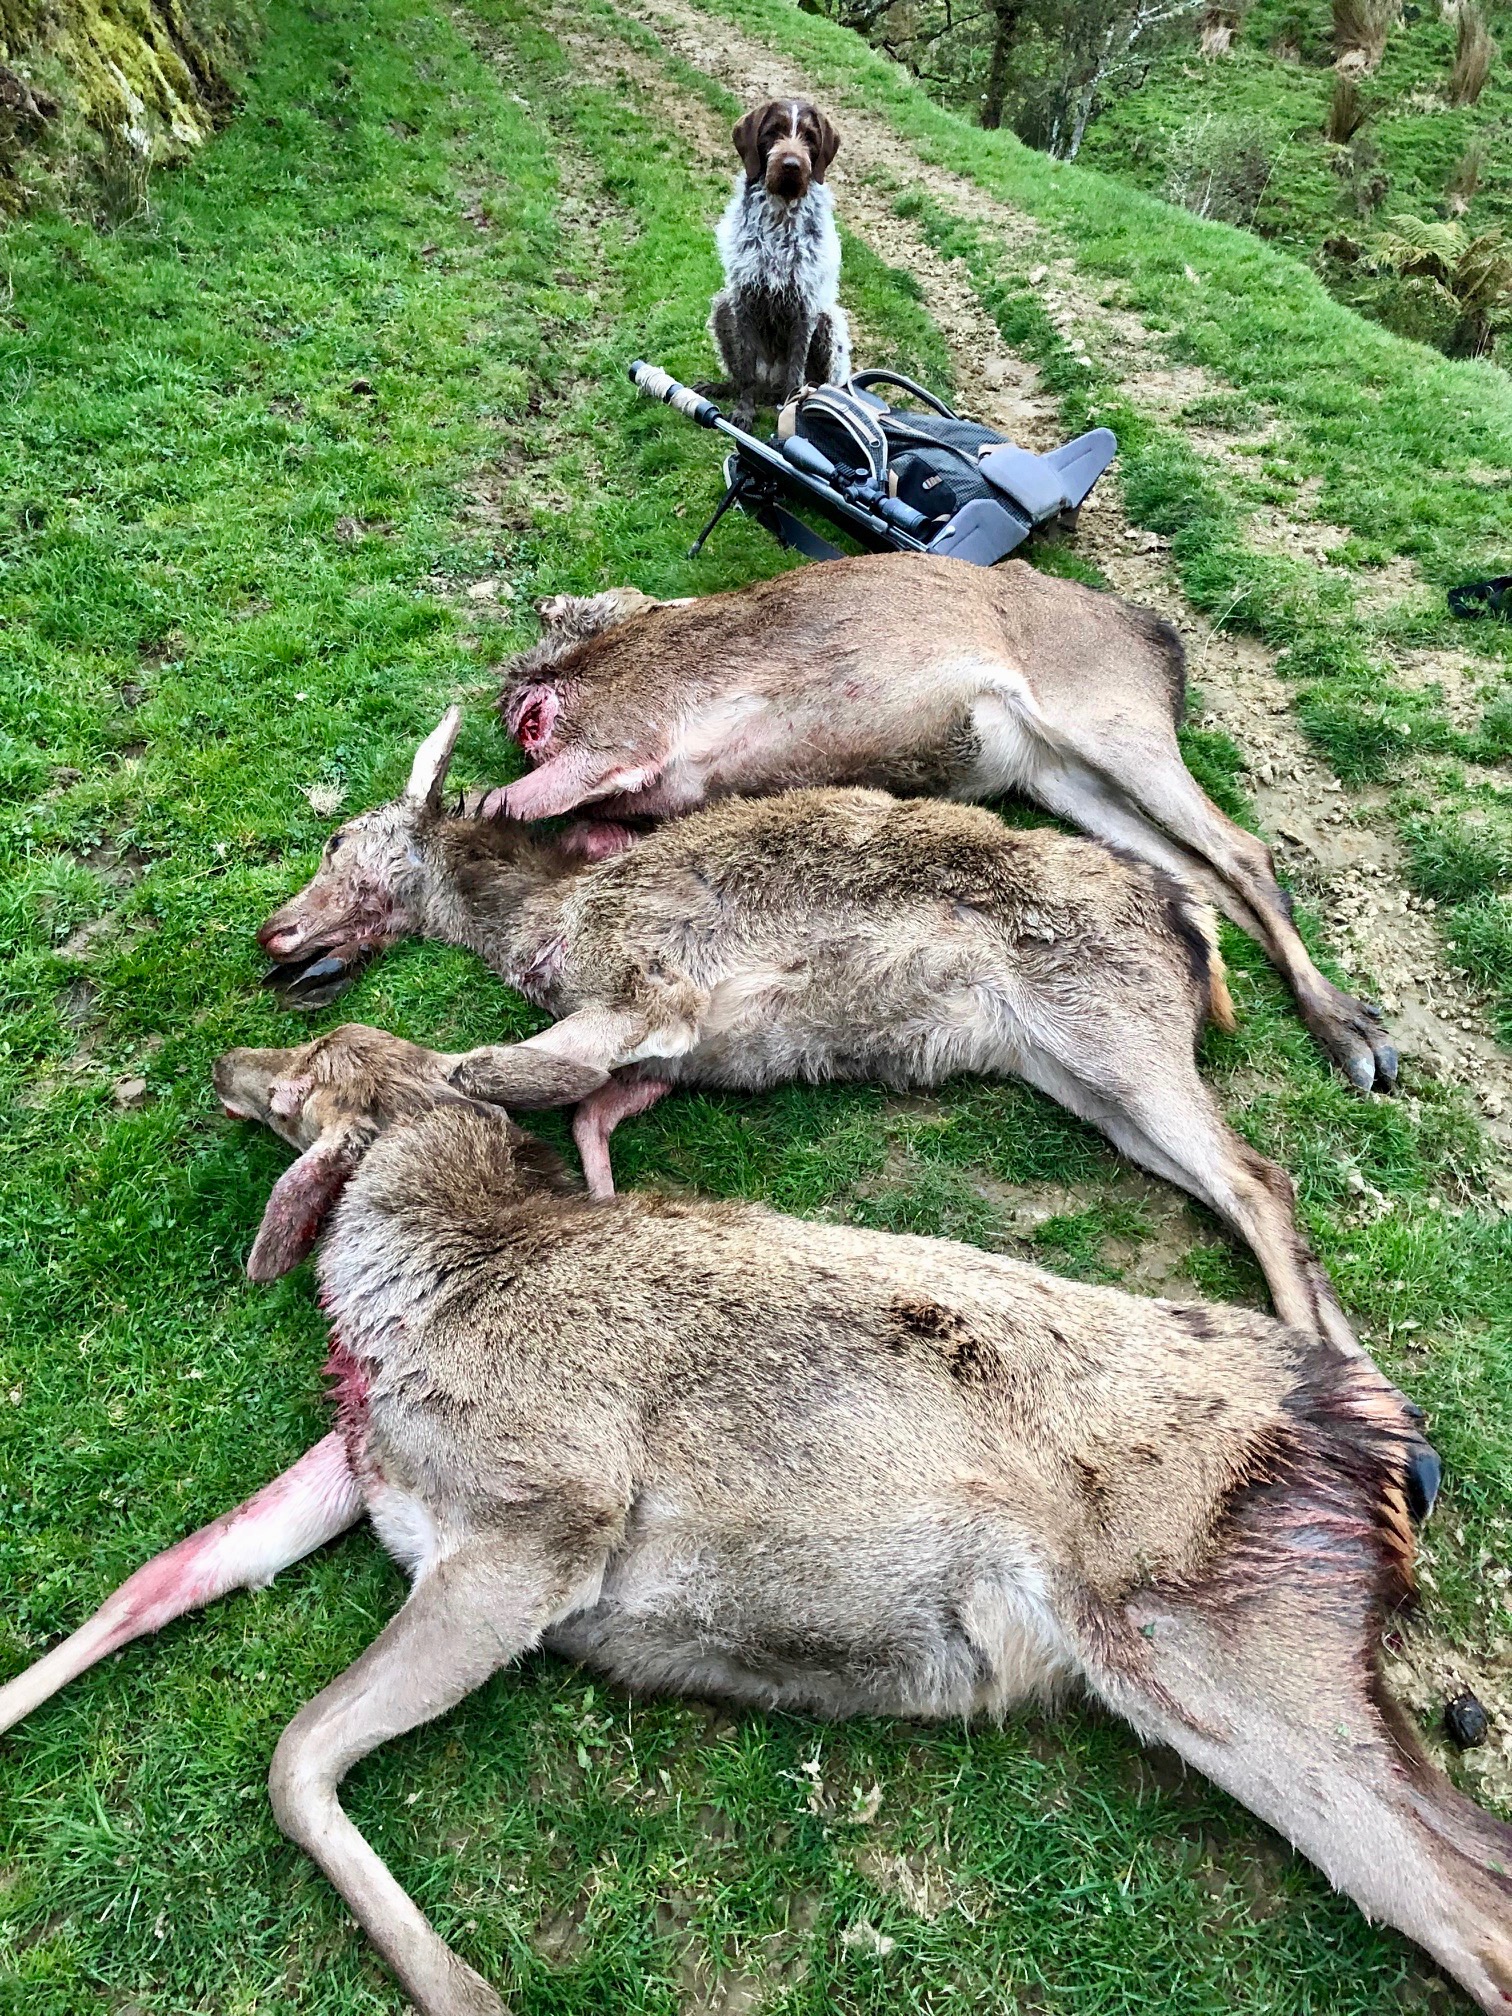 https://www.nzhuntingandshooting.co.nz/attachments/f17/120936d1569586709-shooting-more-than-hunting-img_2274.jpeg